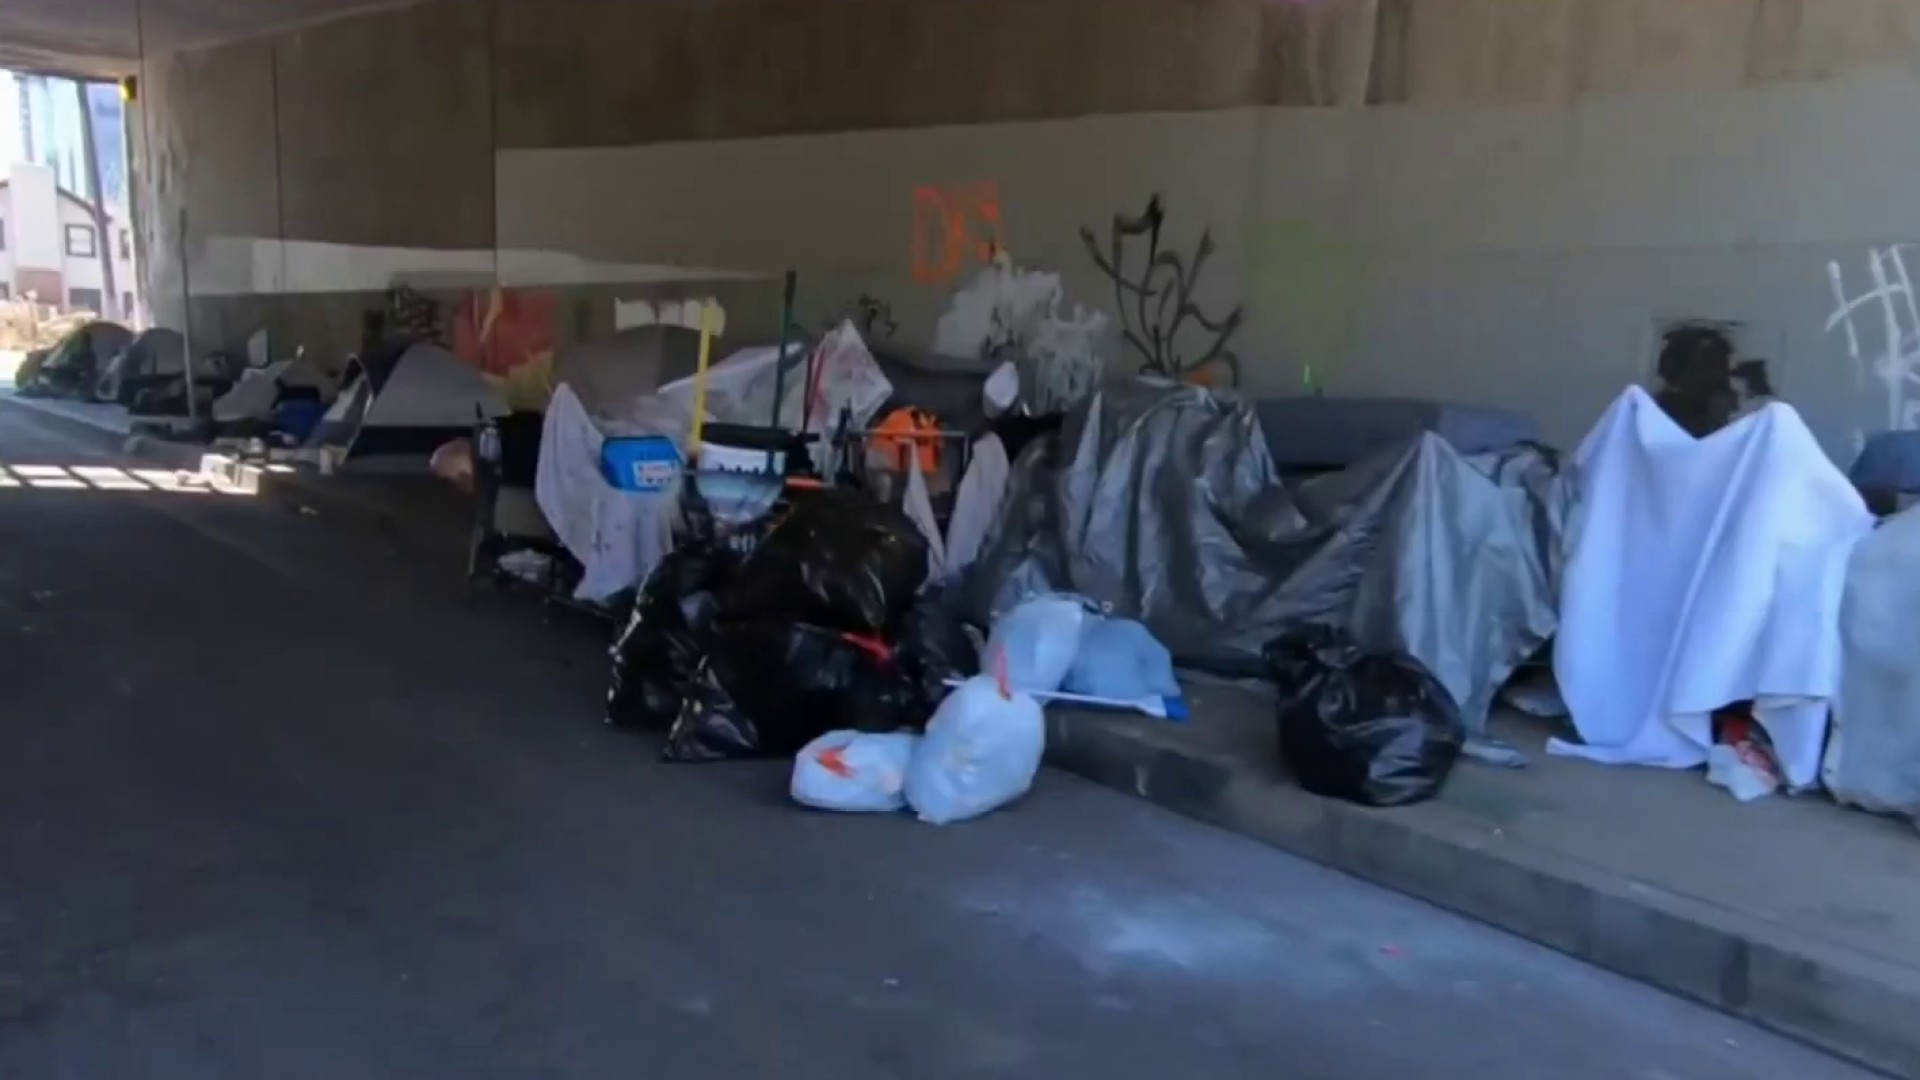 Struggle to Get Unhoused Into Safe Shelter